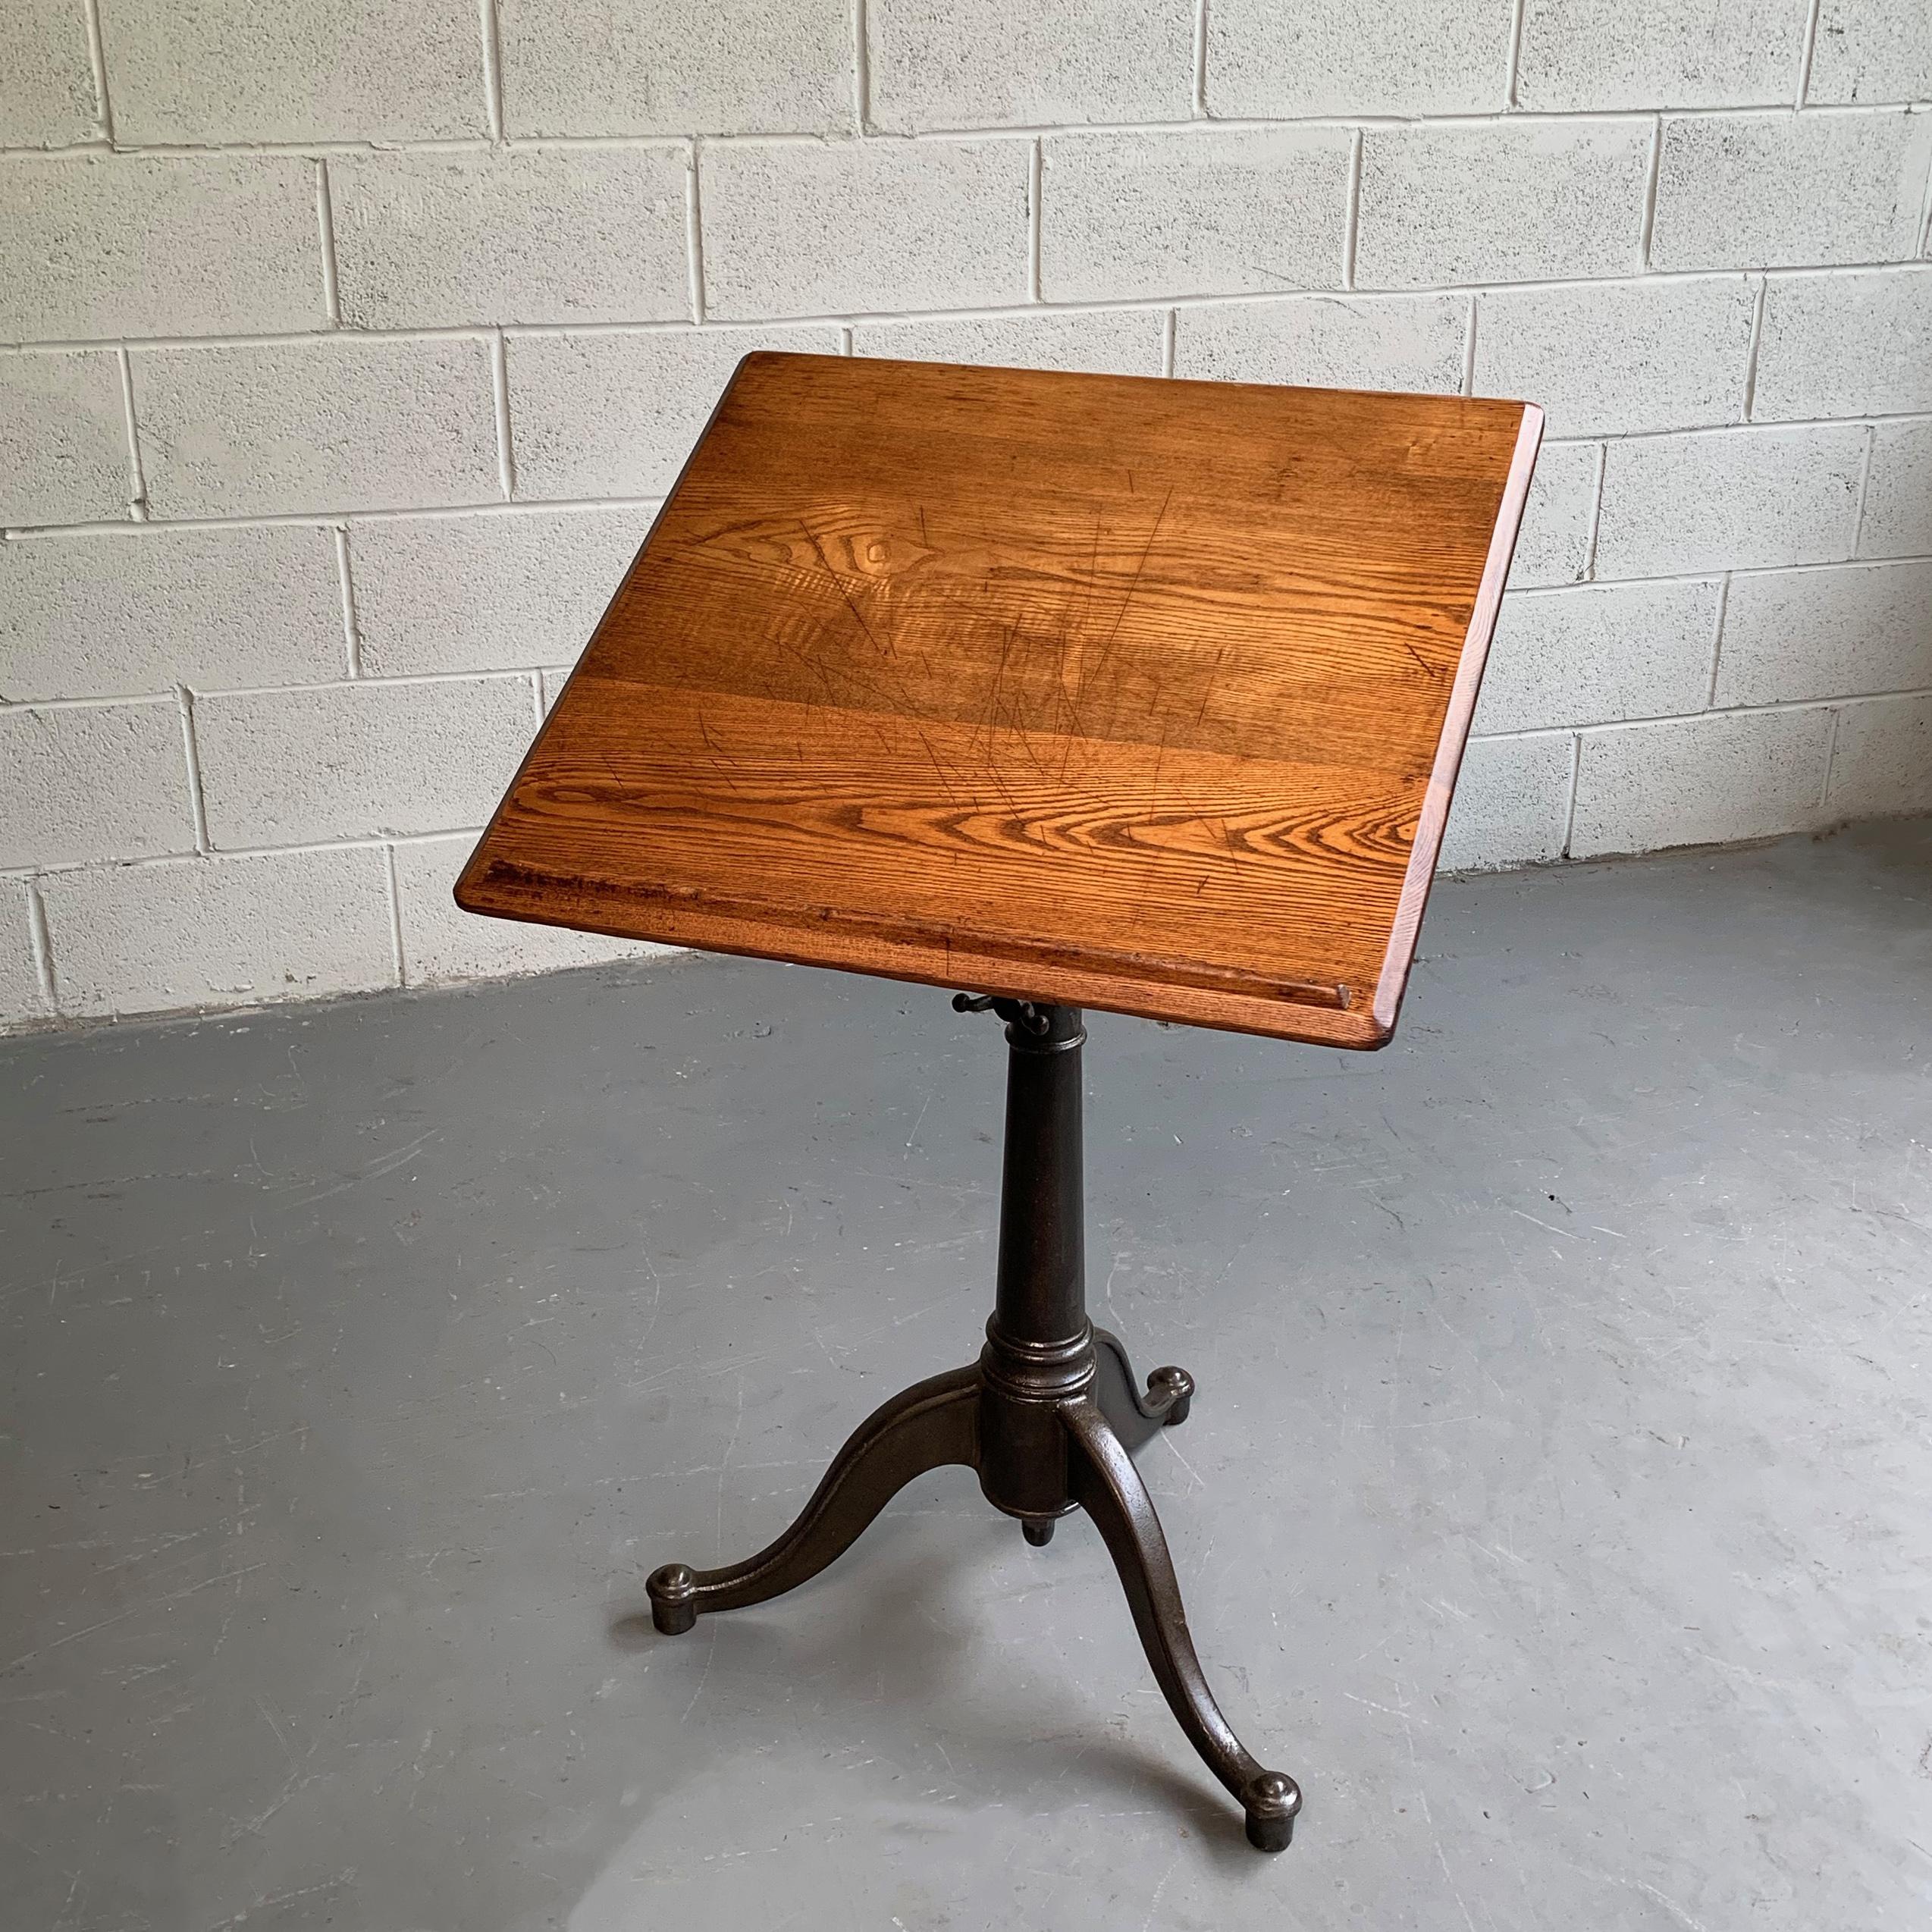 Small, antique, artist rendering easel or drafting table features an oak top with tool ledge on a tilt and height adjustable, dark, cast iron, pedestal base that adjusts from 29 - 40 inches height. The table features engineer supply company, Kolesch